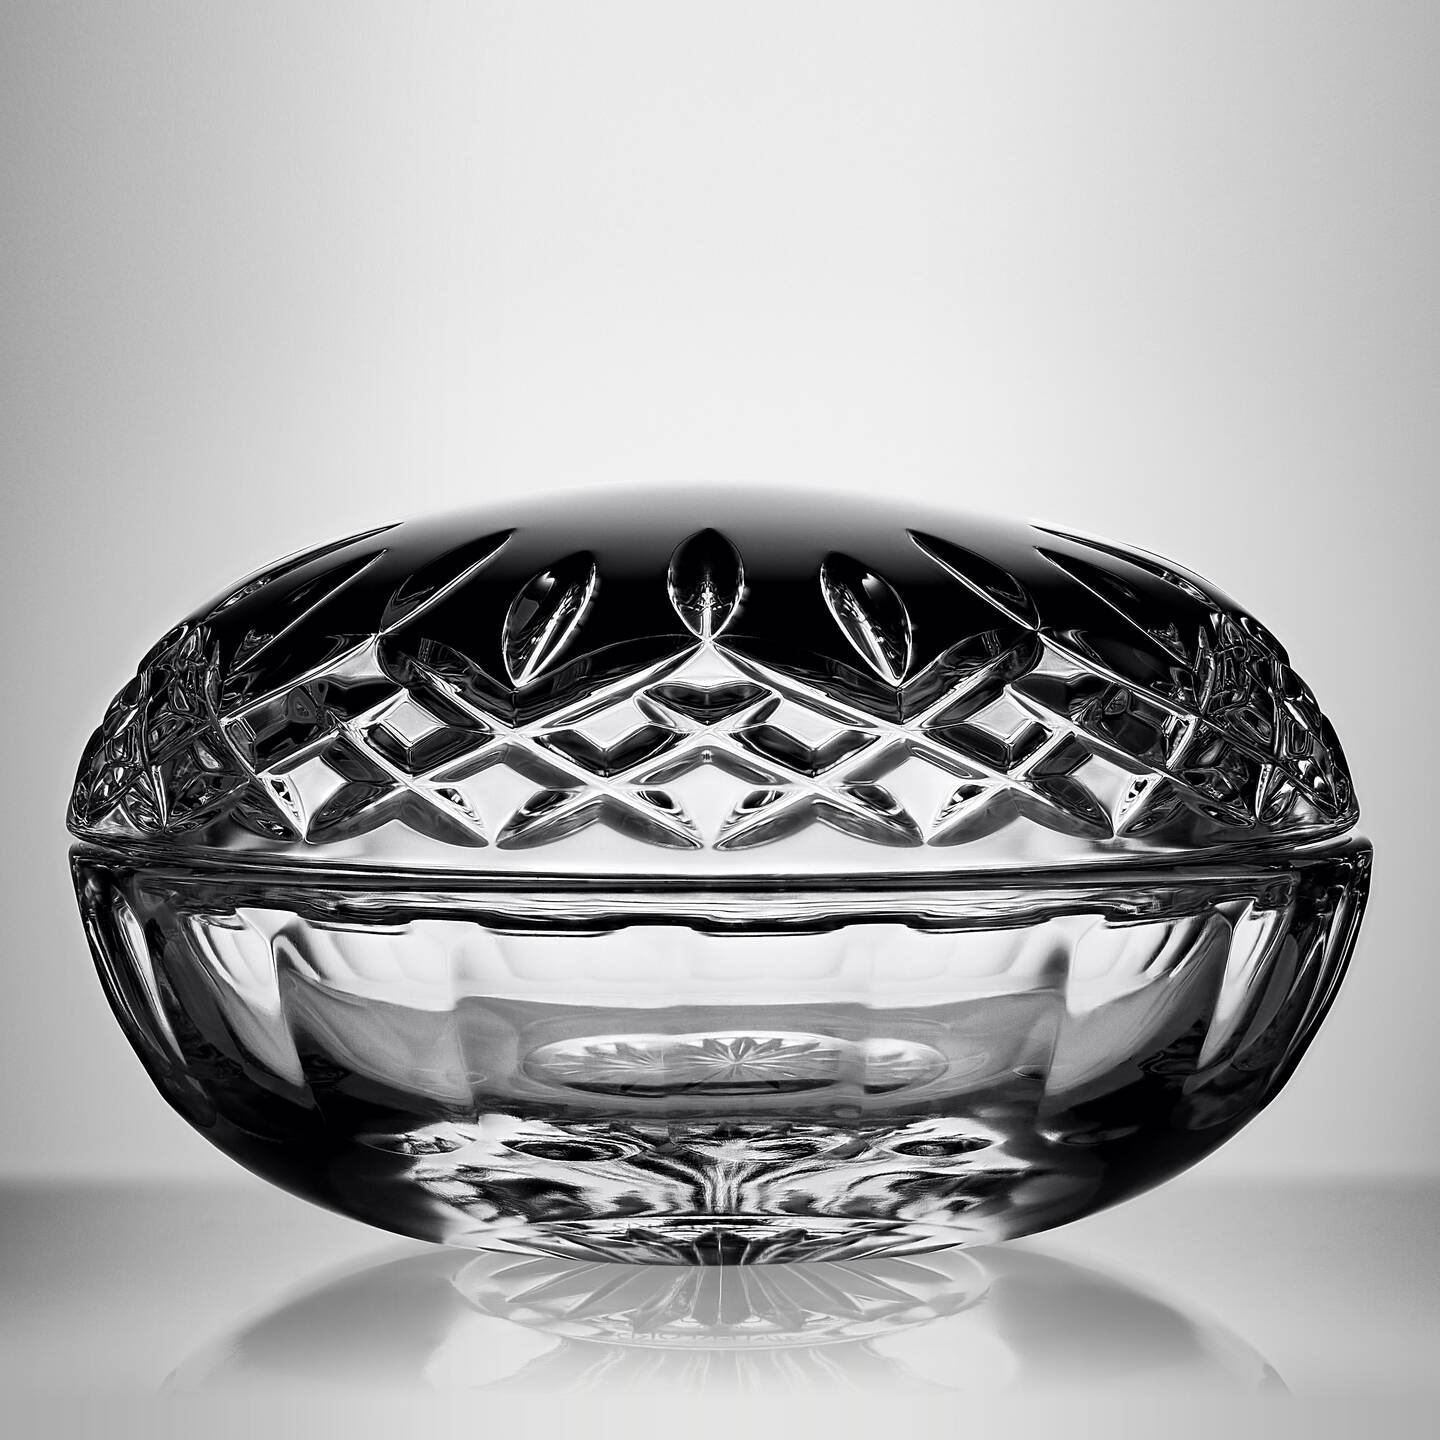 Waterford Crystal Desk Items